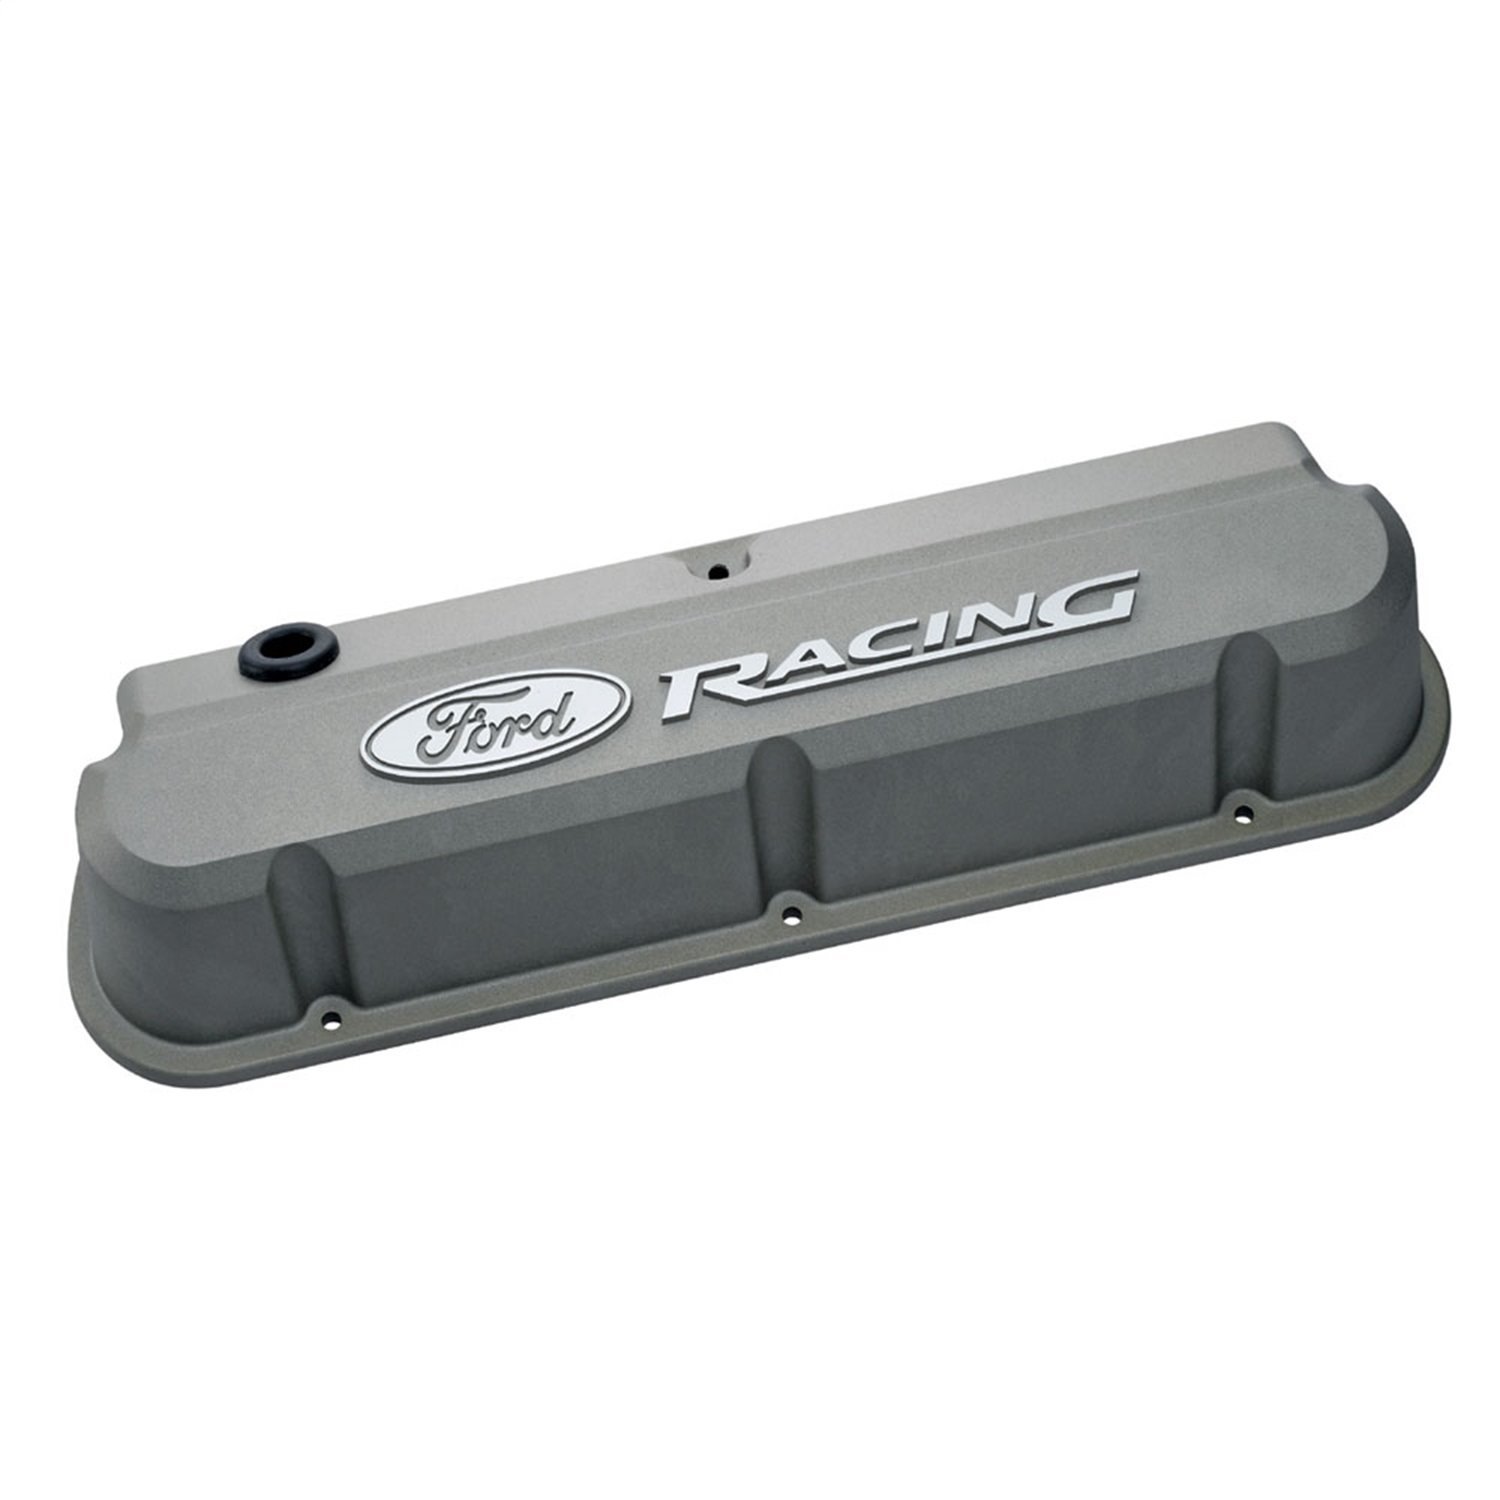 Slant Edge Ford Racing Valve Covers for Small